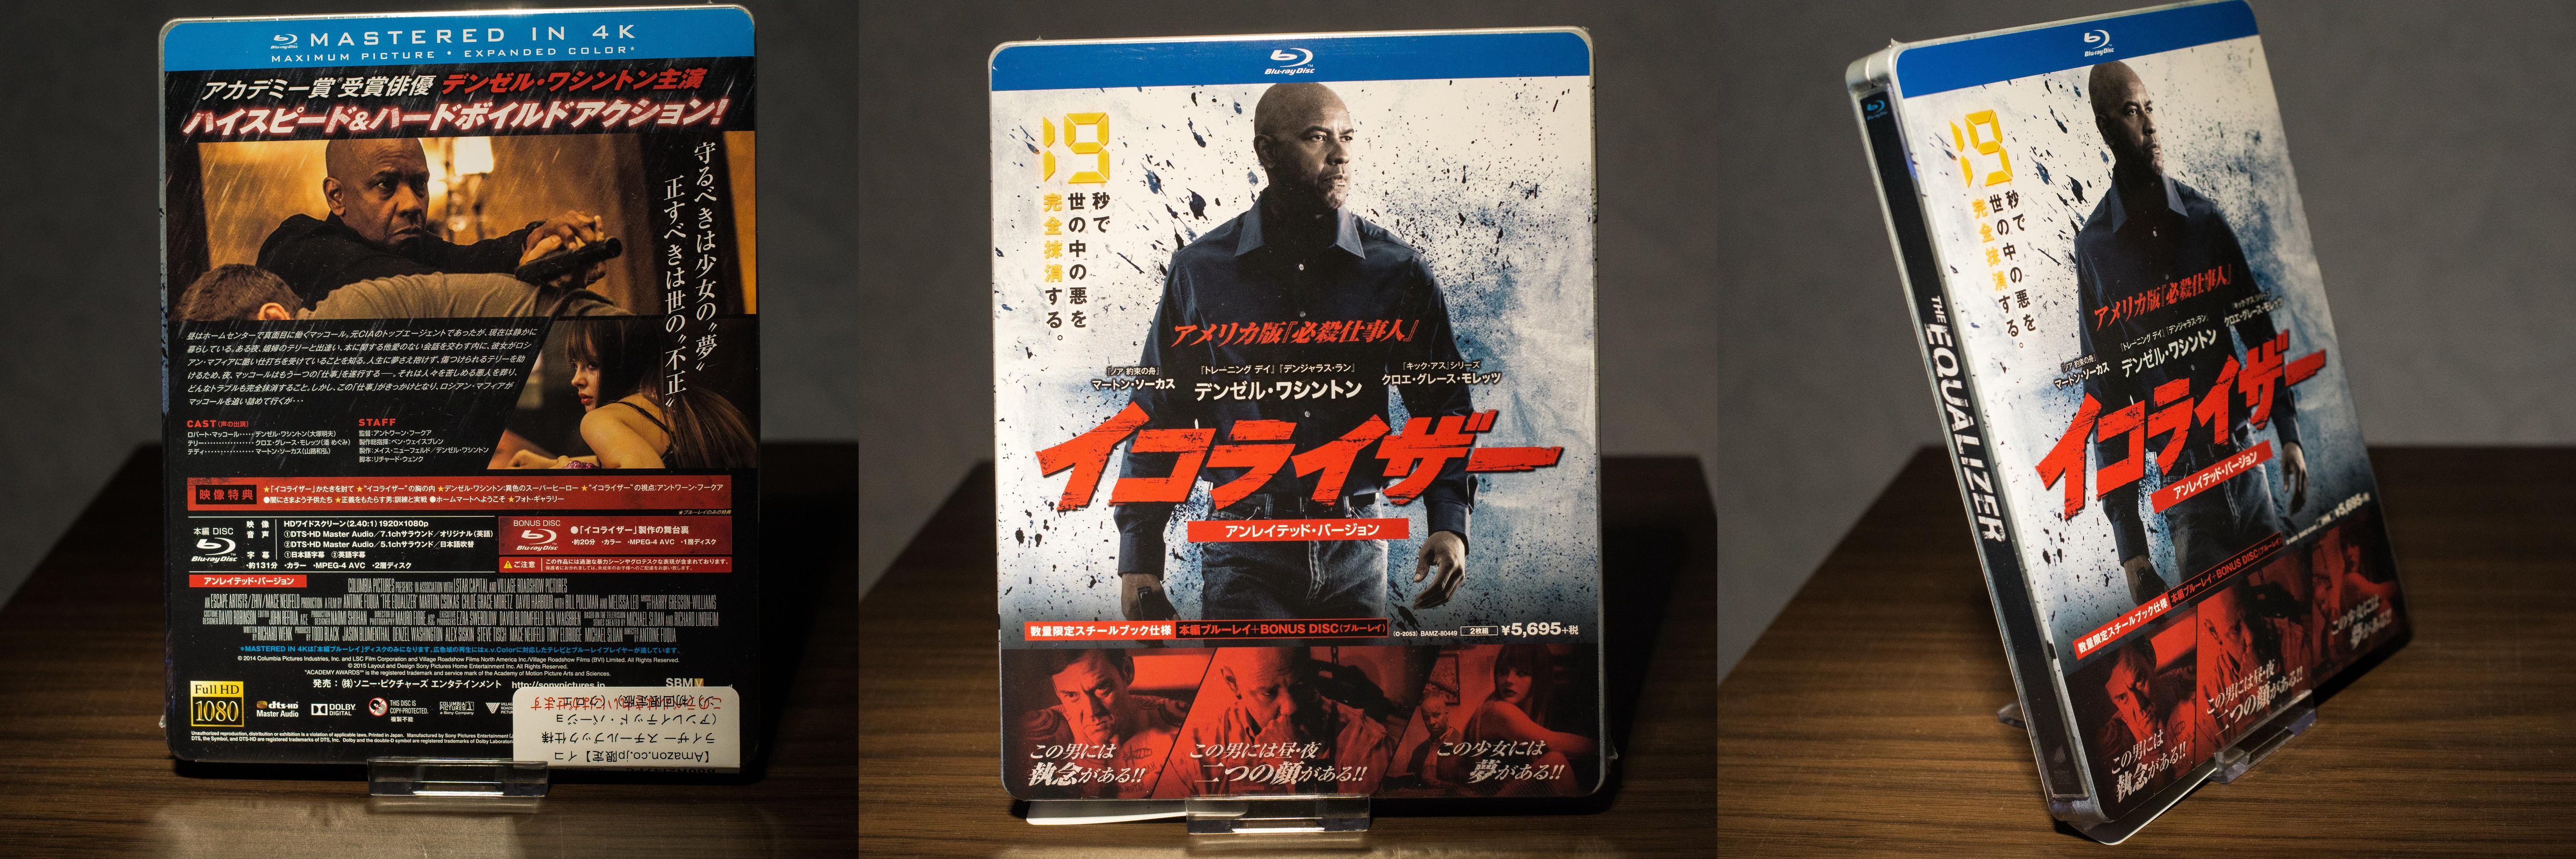 The Equalizer Bluray Steelbook Japan Amazon Exclusive